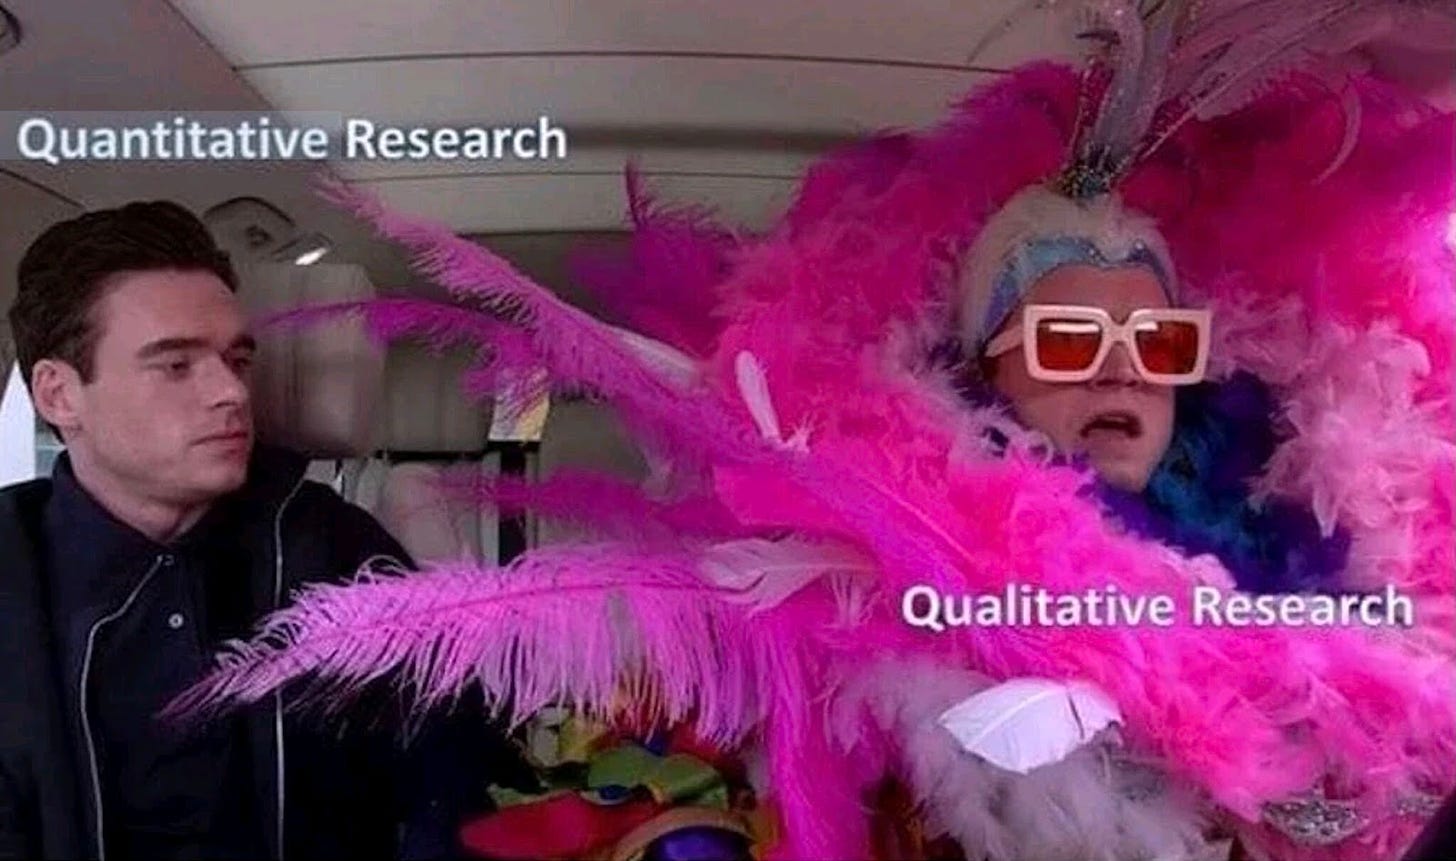 on the right is a man, dressed in a feathery attire and labelled qualitative research. On the left is another man in a black shit and jacket, labelled quantitatve research. 